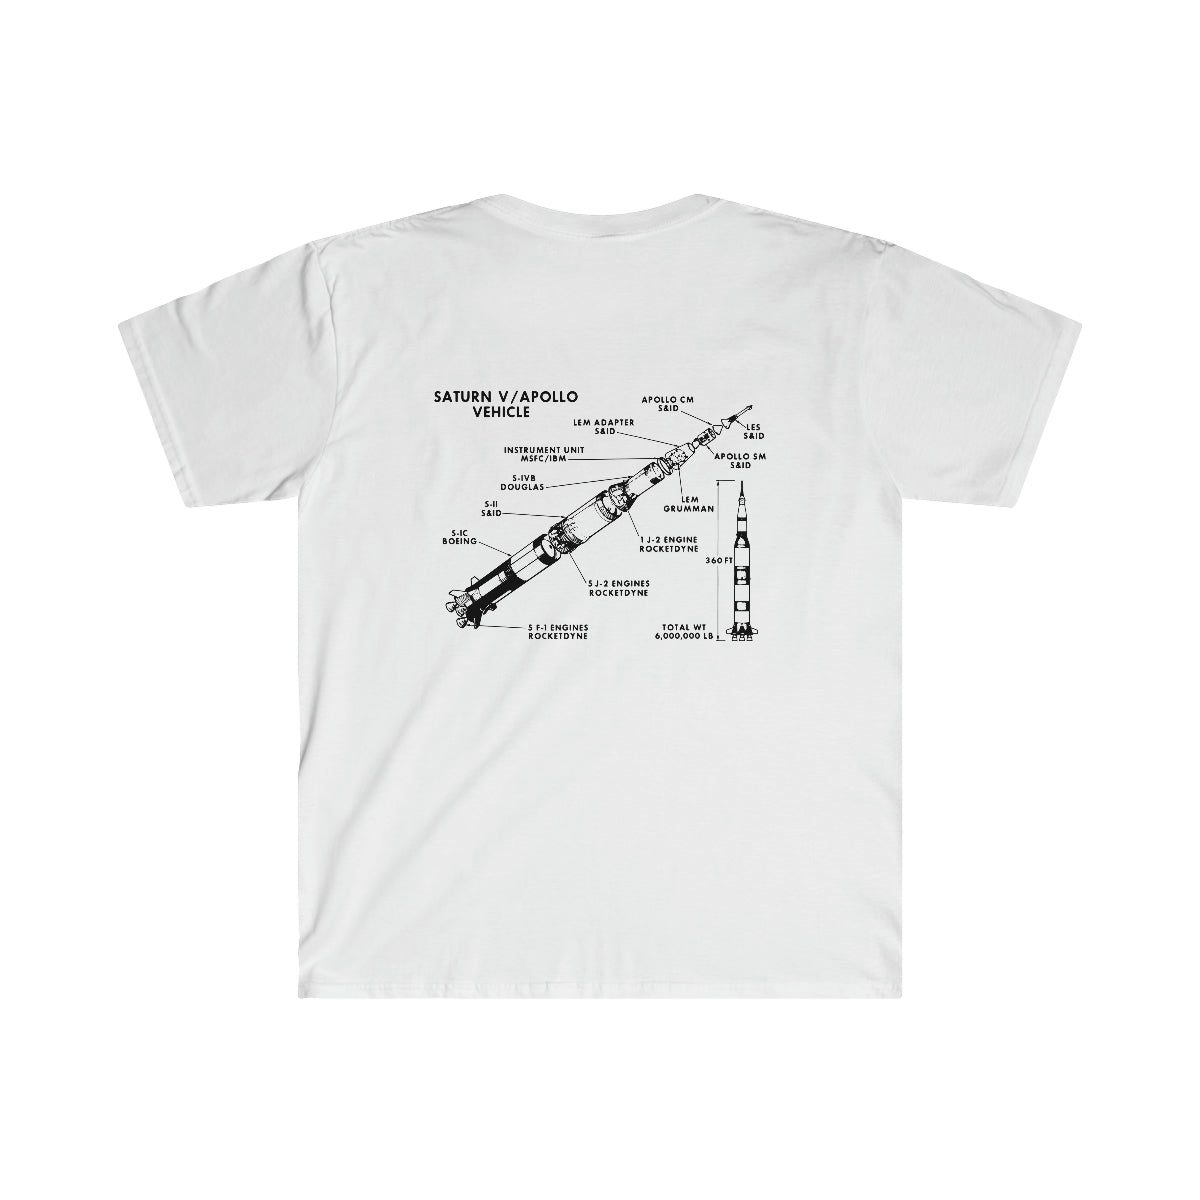 A white Saturn / Apollo Vehicle T-Shirt, perfect for space exploration enthusiasts.